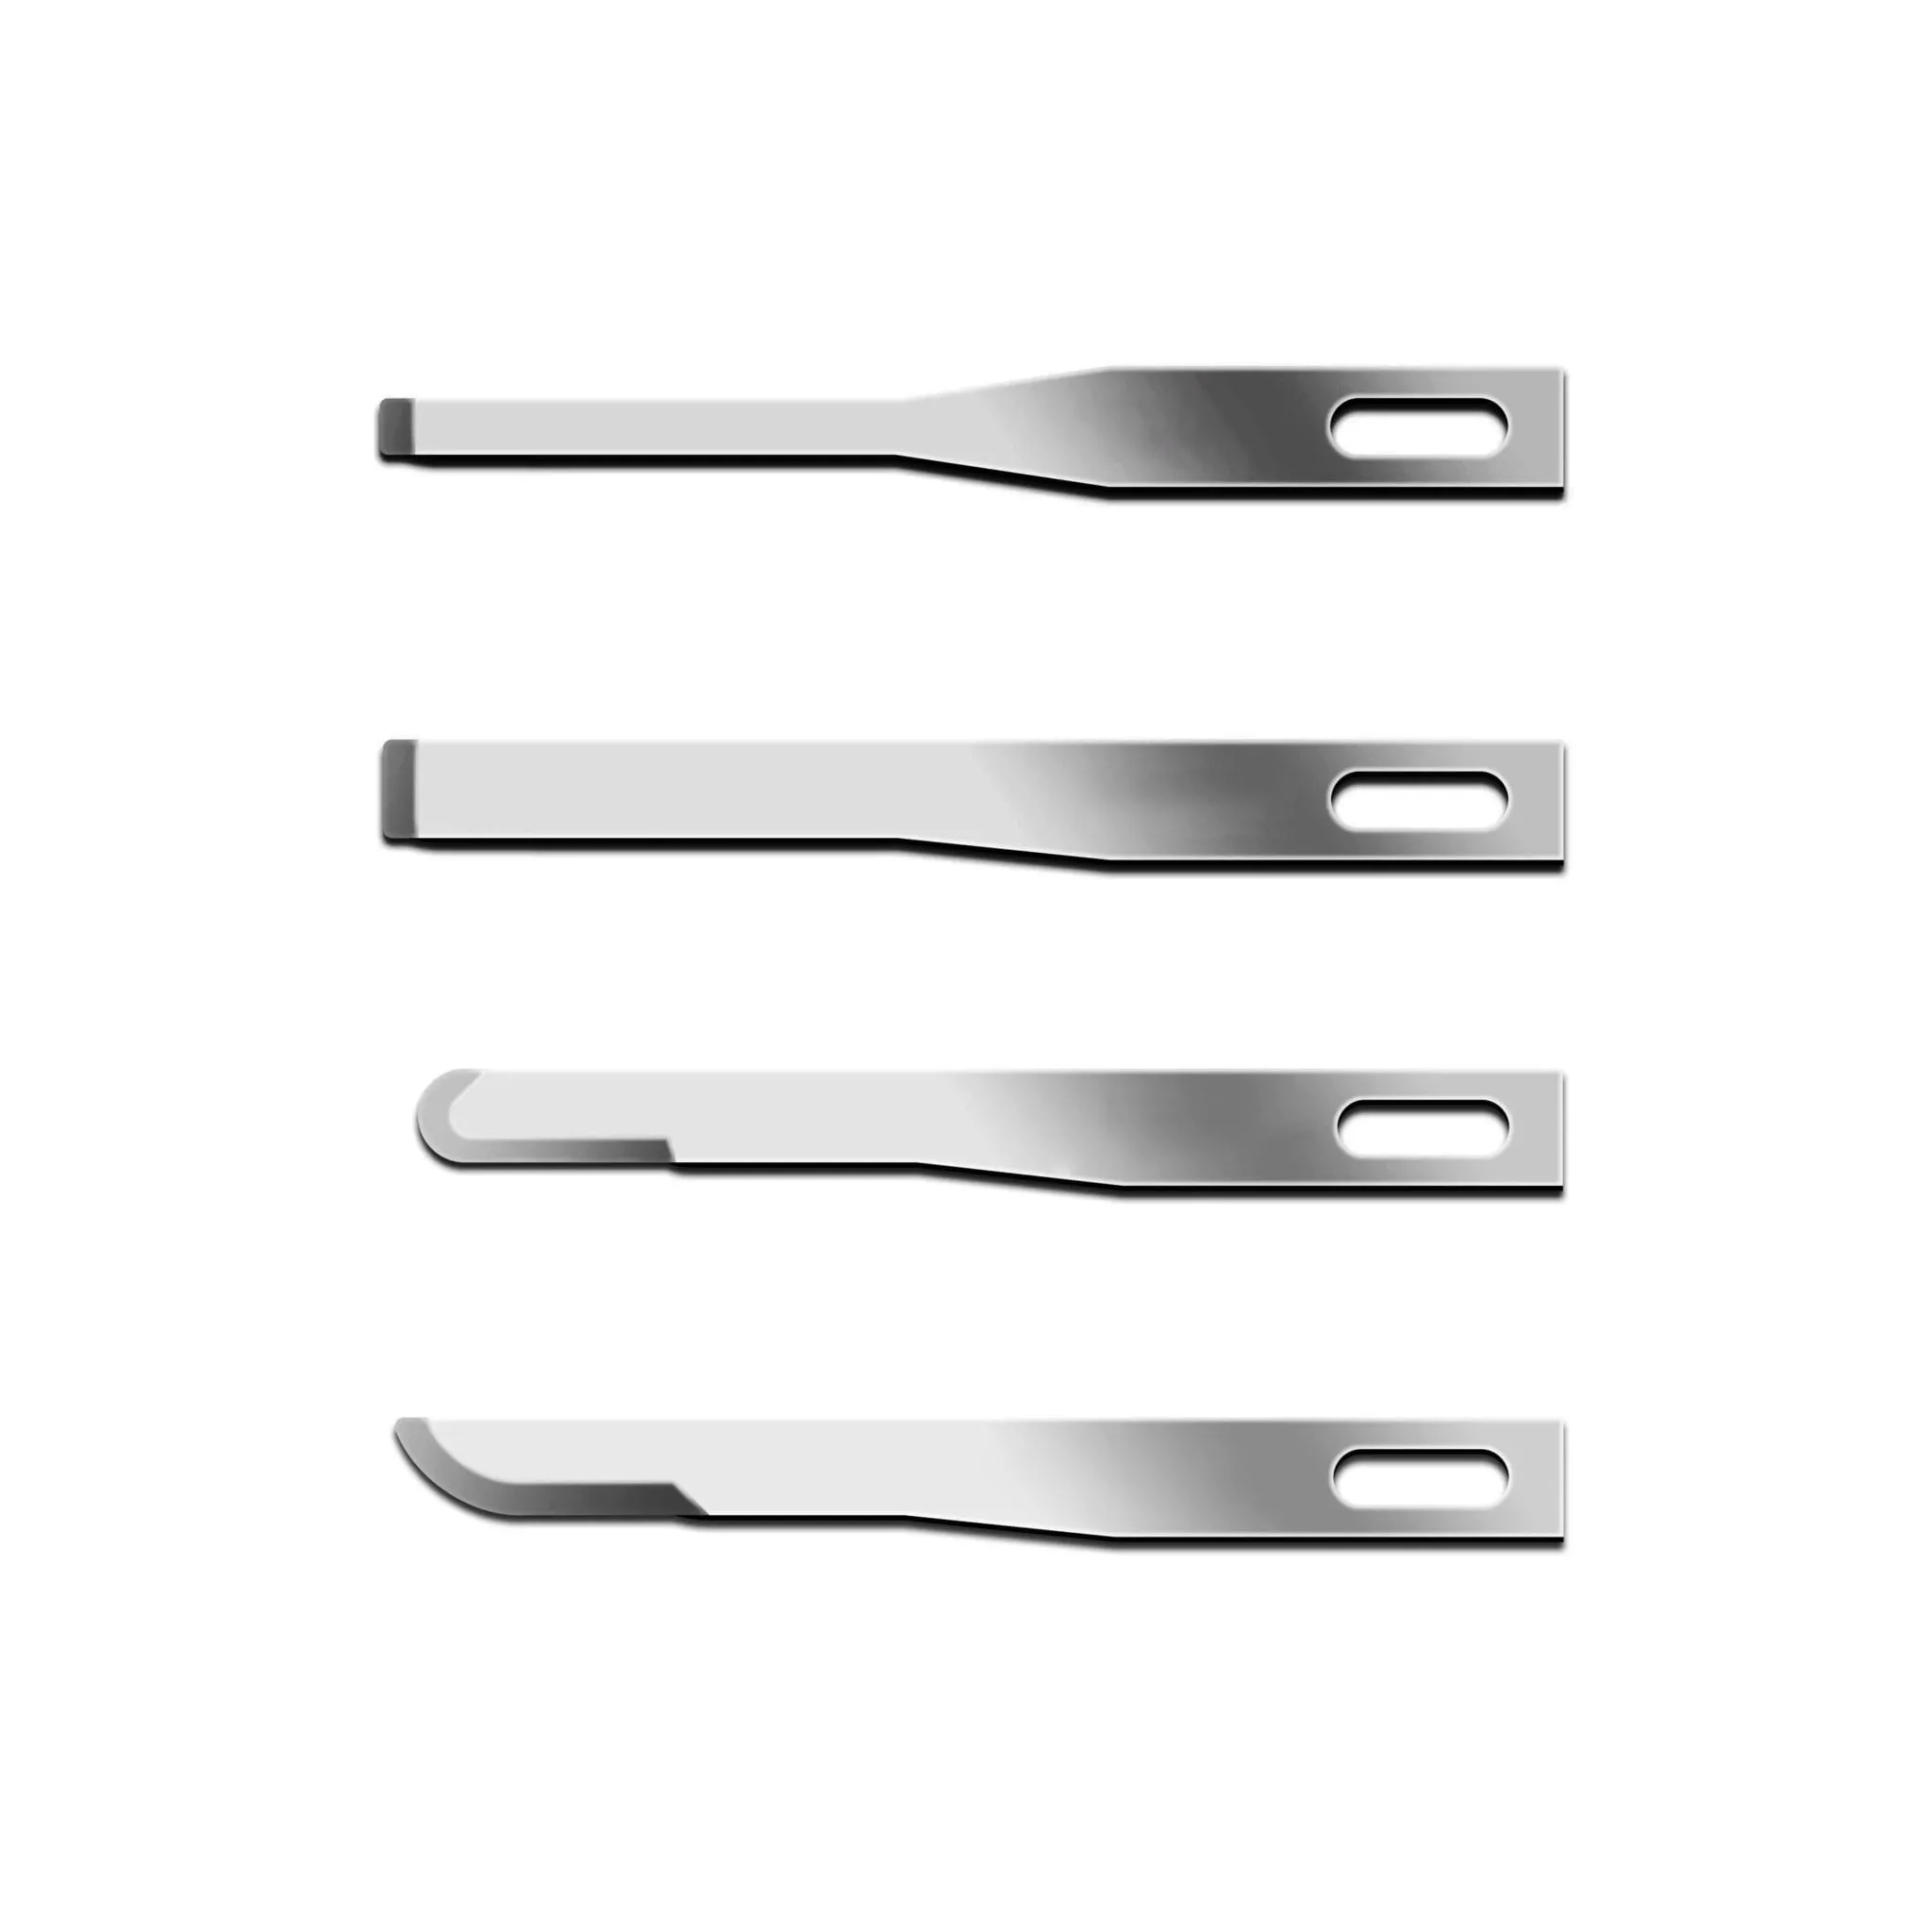 Propper - From: 12706100 To: 12706700 - Manufacturing Fine Surgical Blades